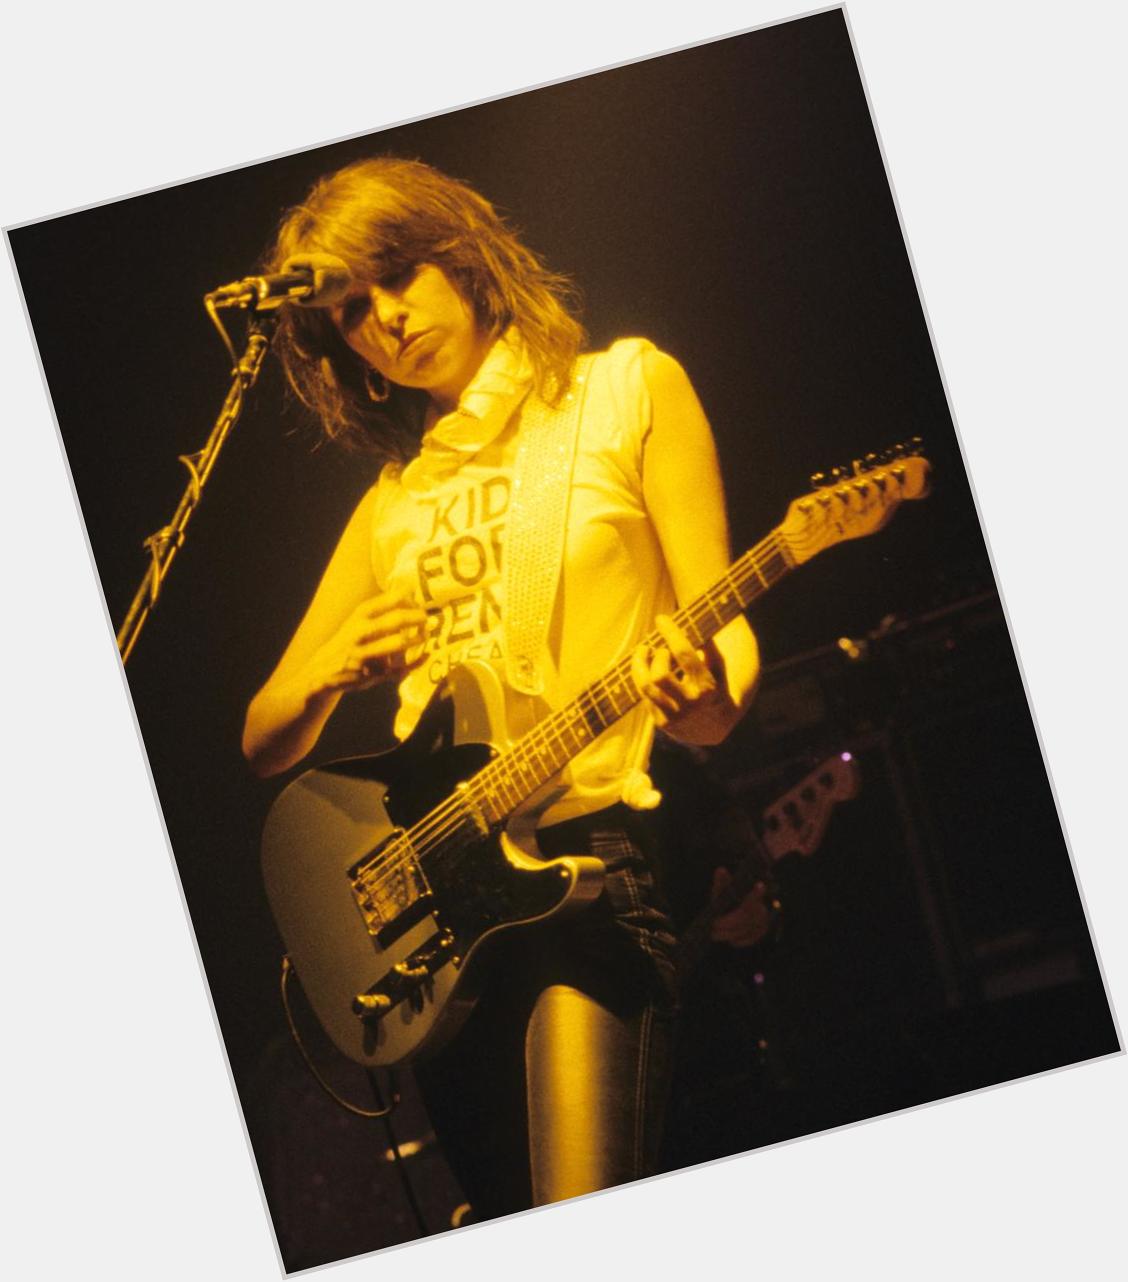 Happy birthday to Chrissie Hynde of The Pretenders! 